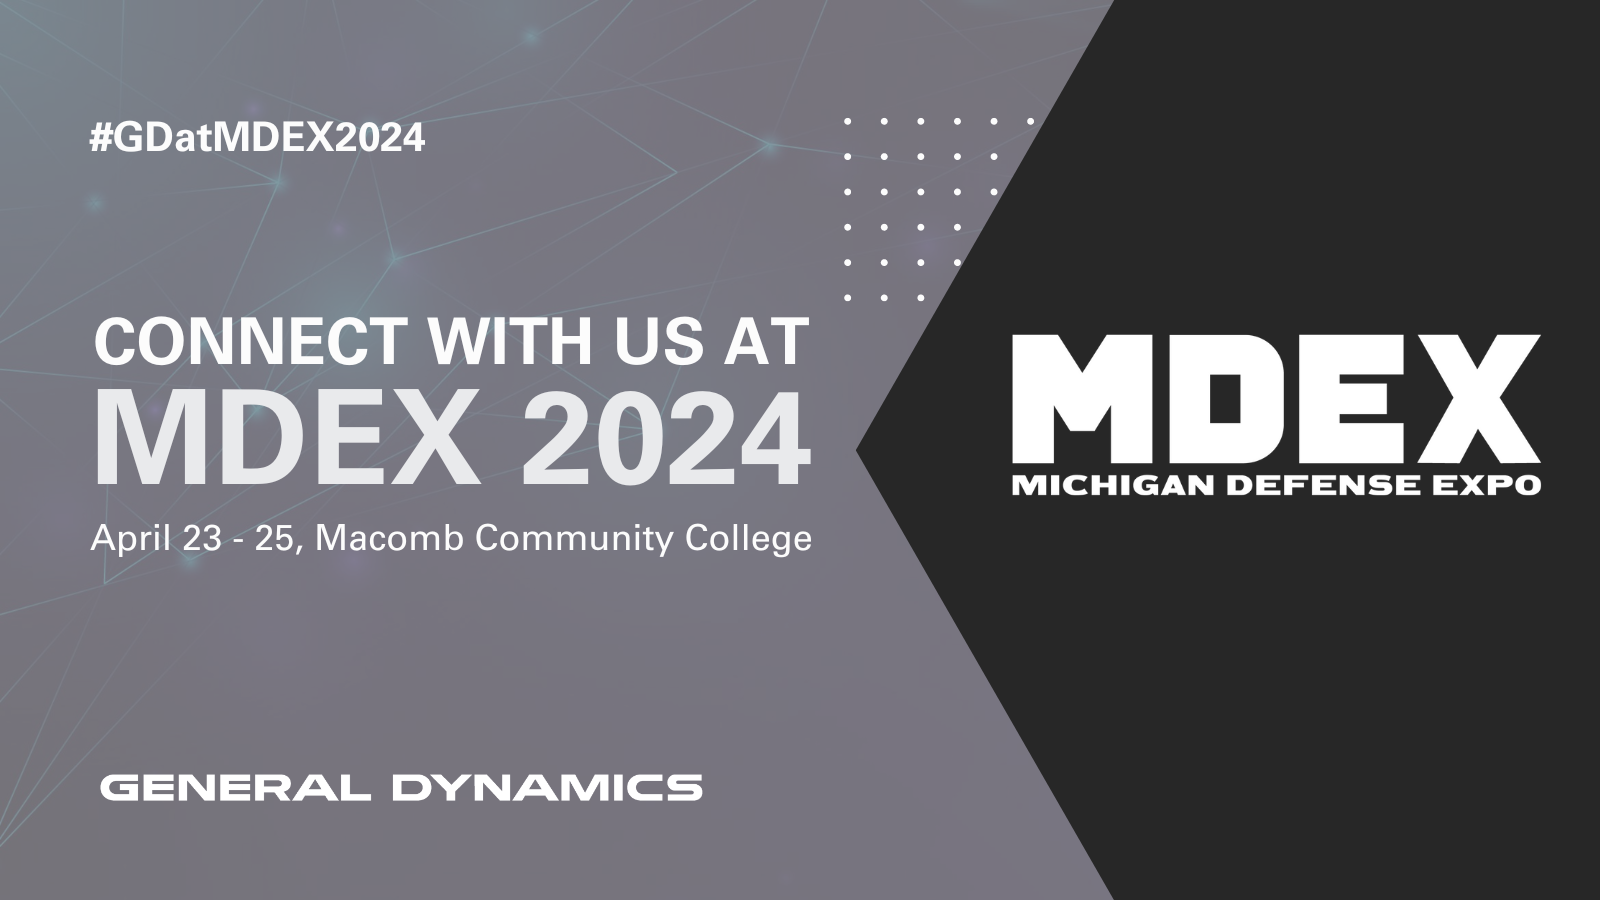 Grey event card with text saying "connect with us at MDEX 2024. April 23 - 25, Macomb Community College."